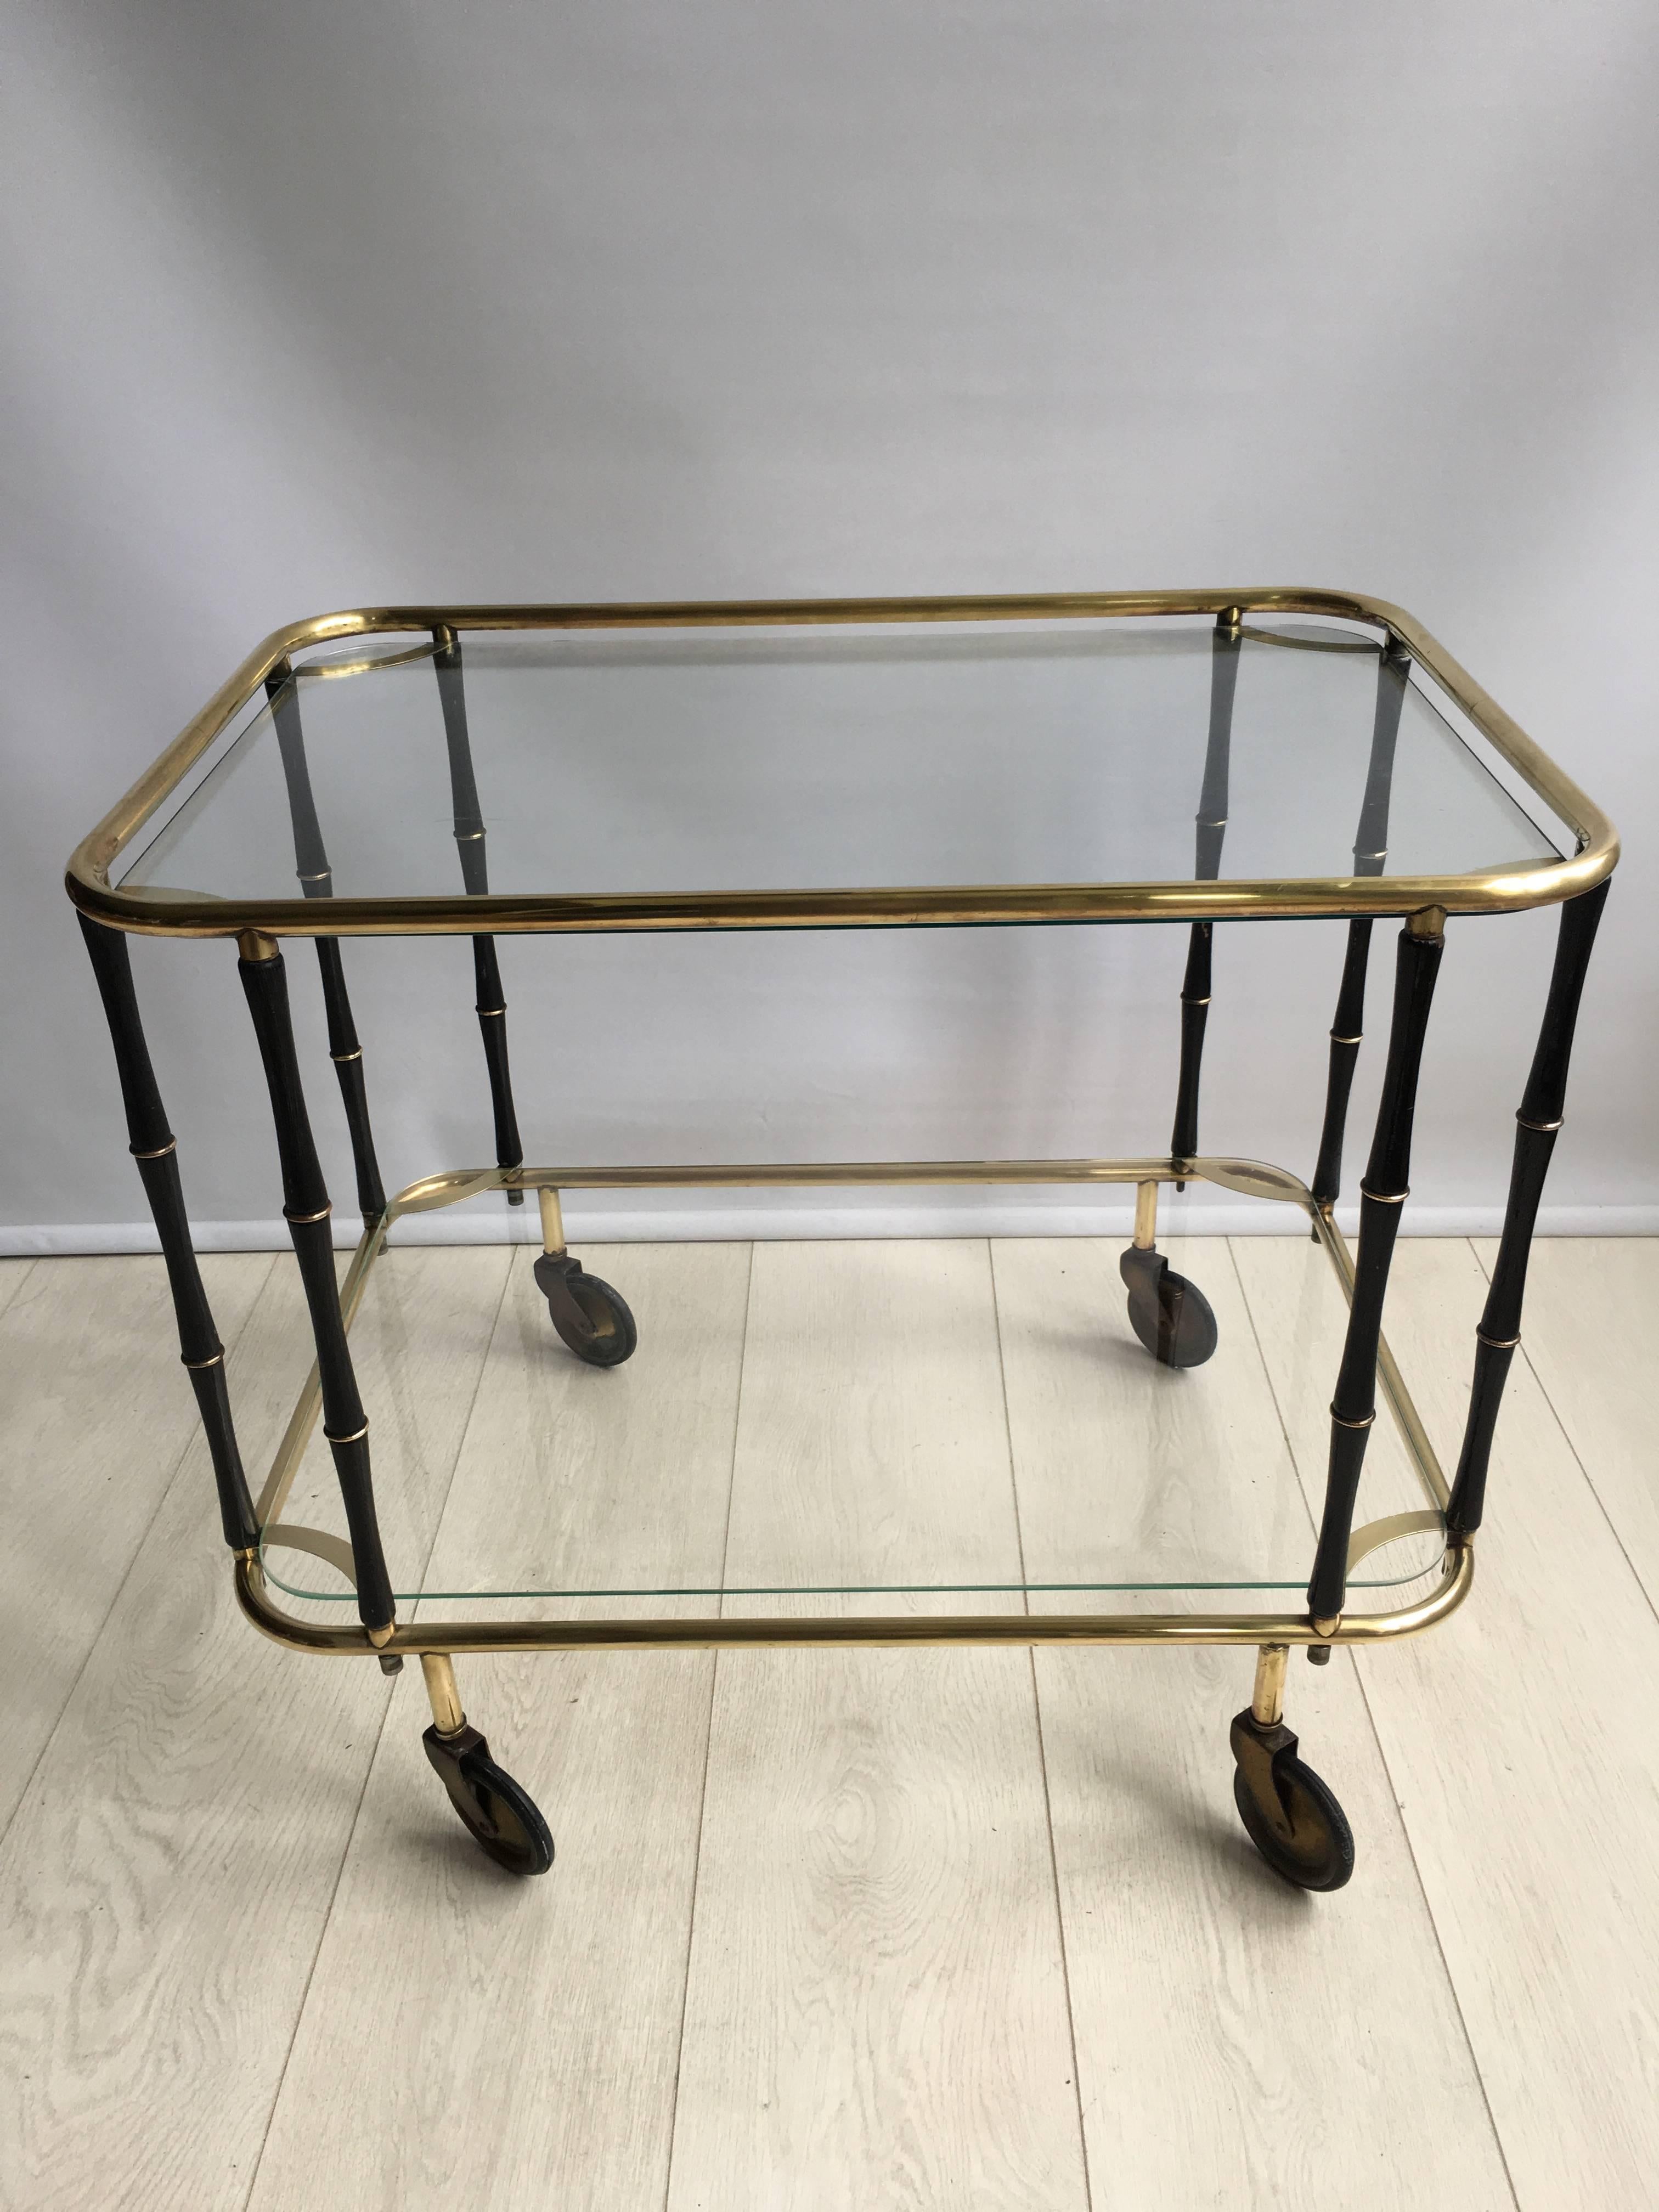 Hollywood Regency Midcentury Faux Bamboo and Brass Drinks Trolley/Bar Cart For Sale